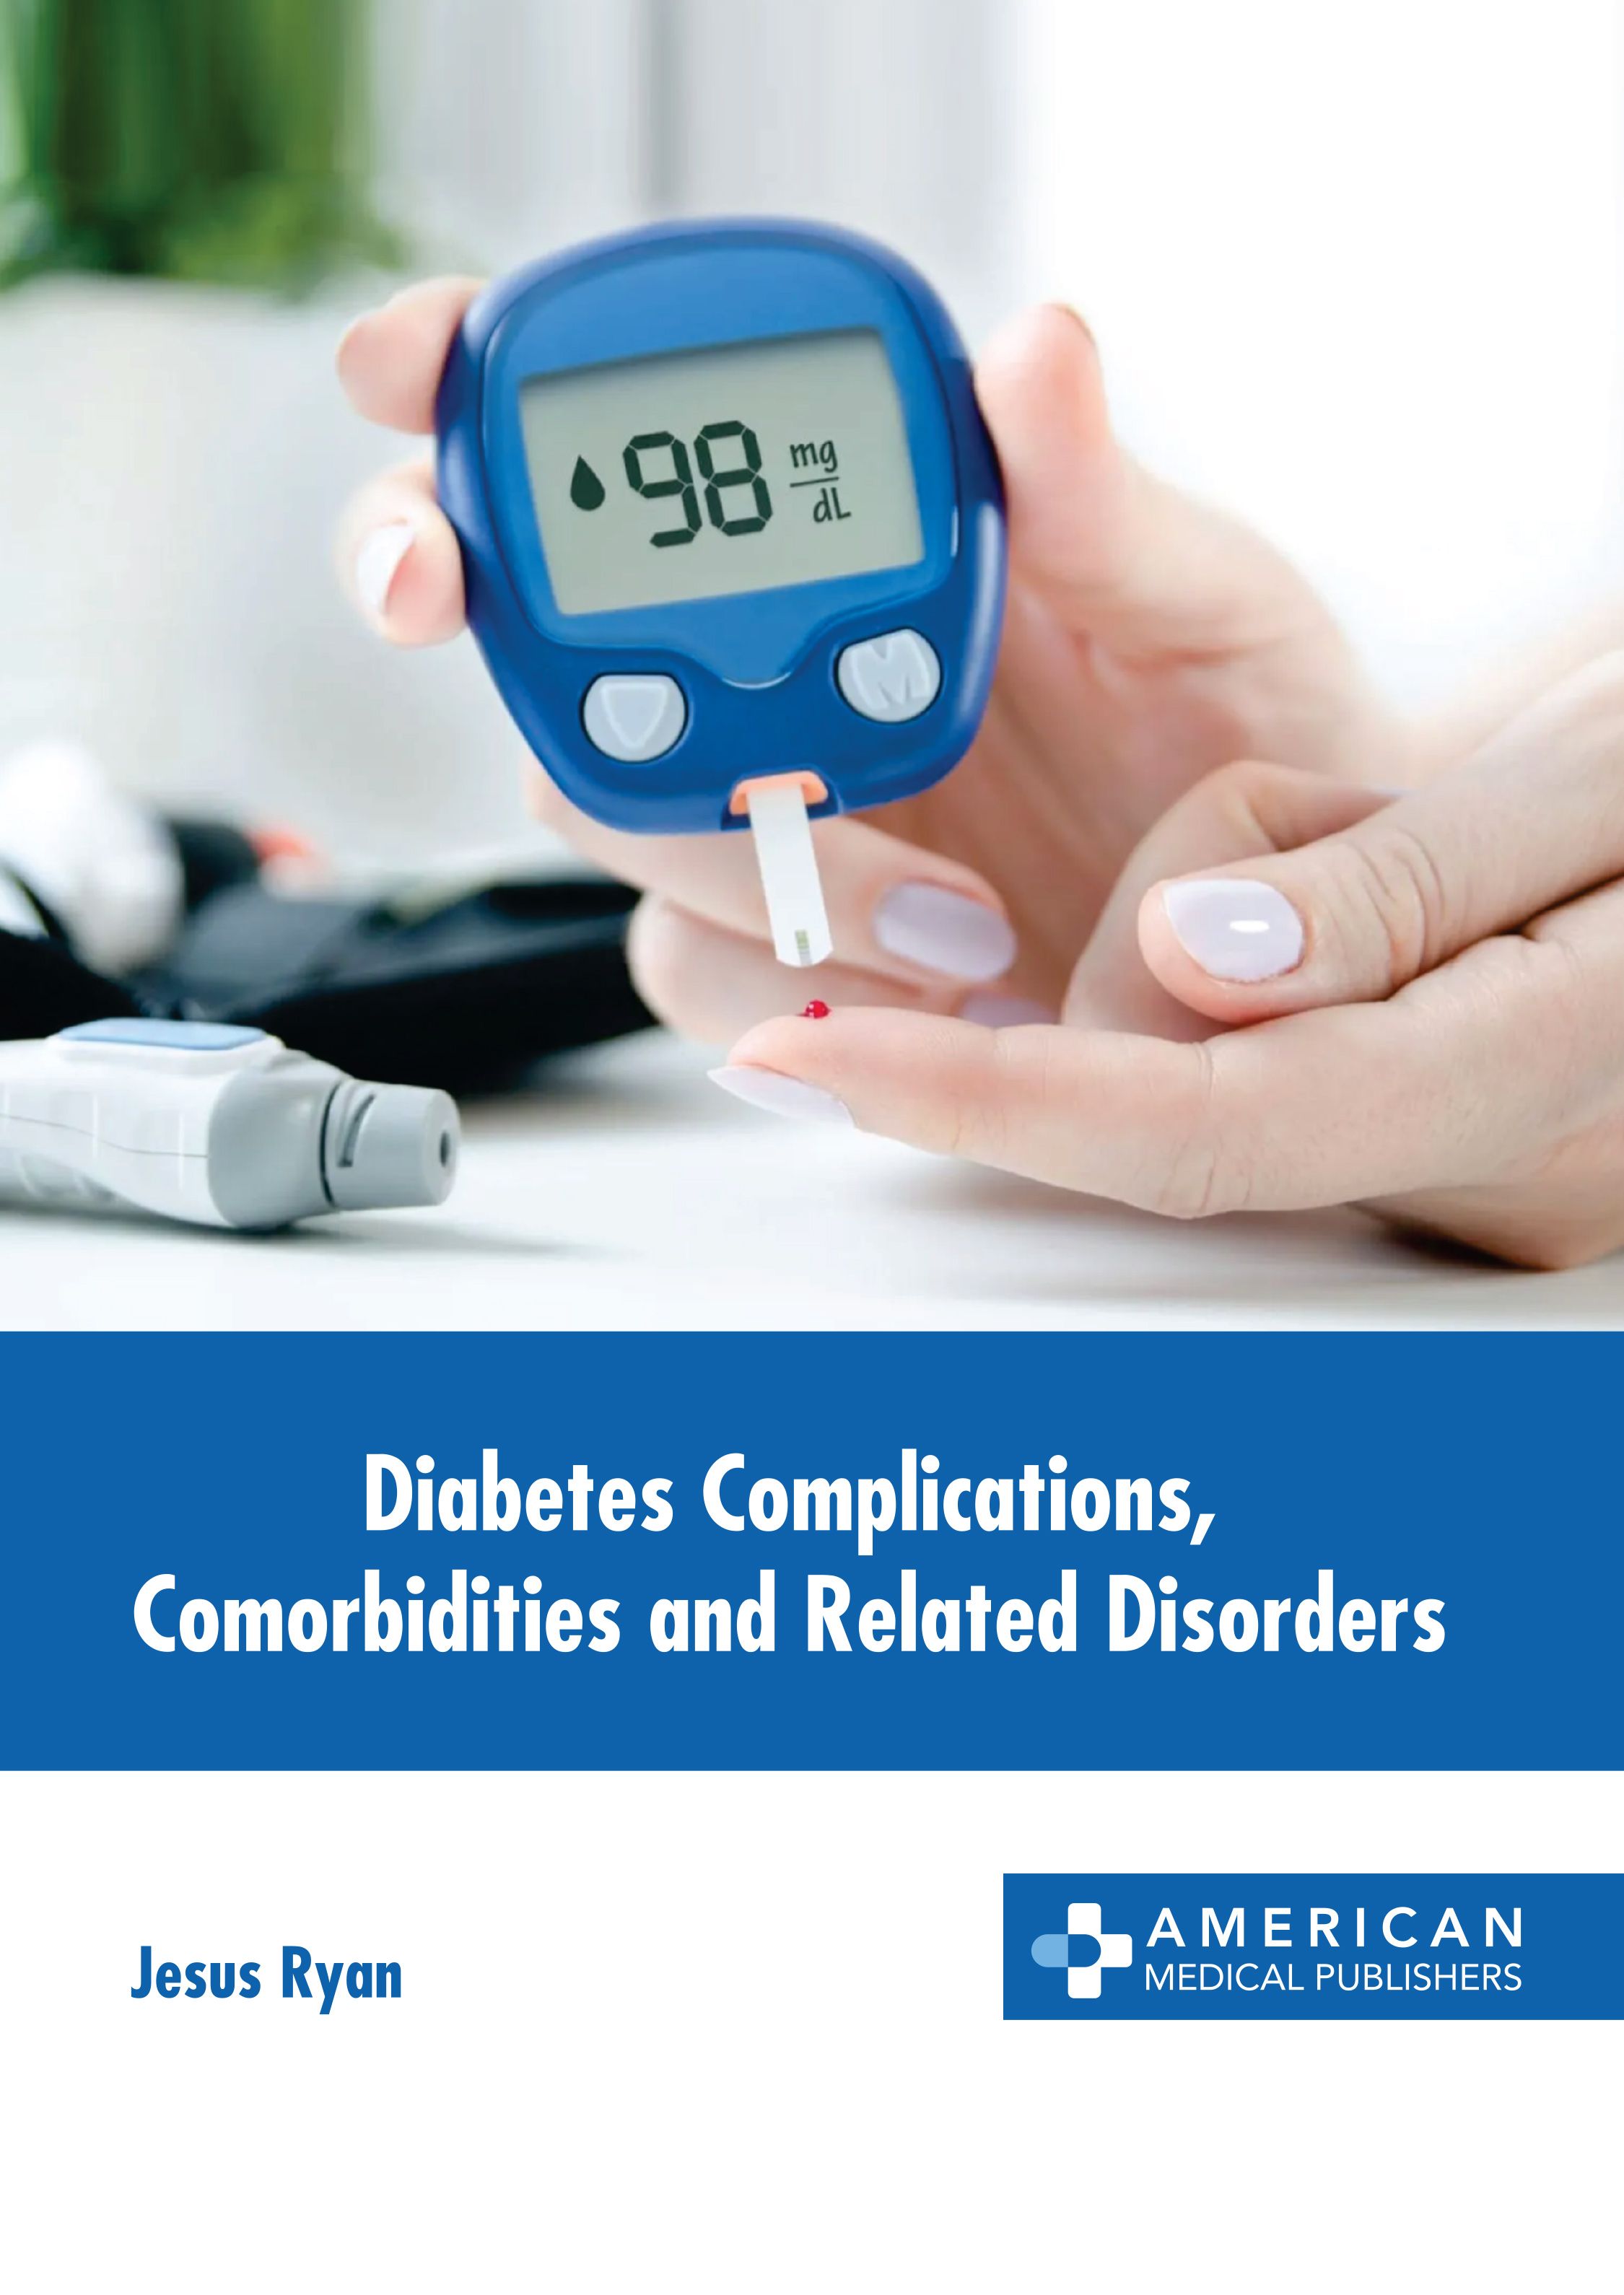 DIABETES COMPLICATIONS, COMORBIDITIES AND RELATED DISORDERS